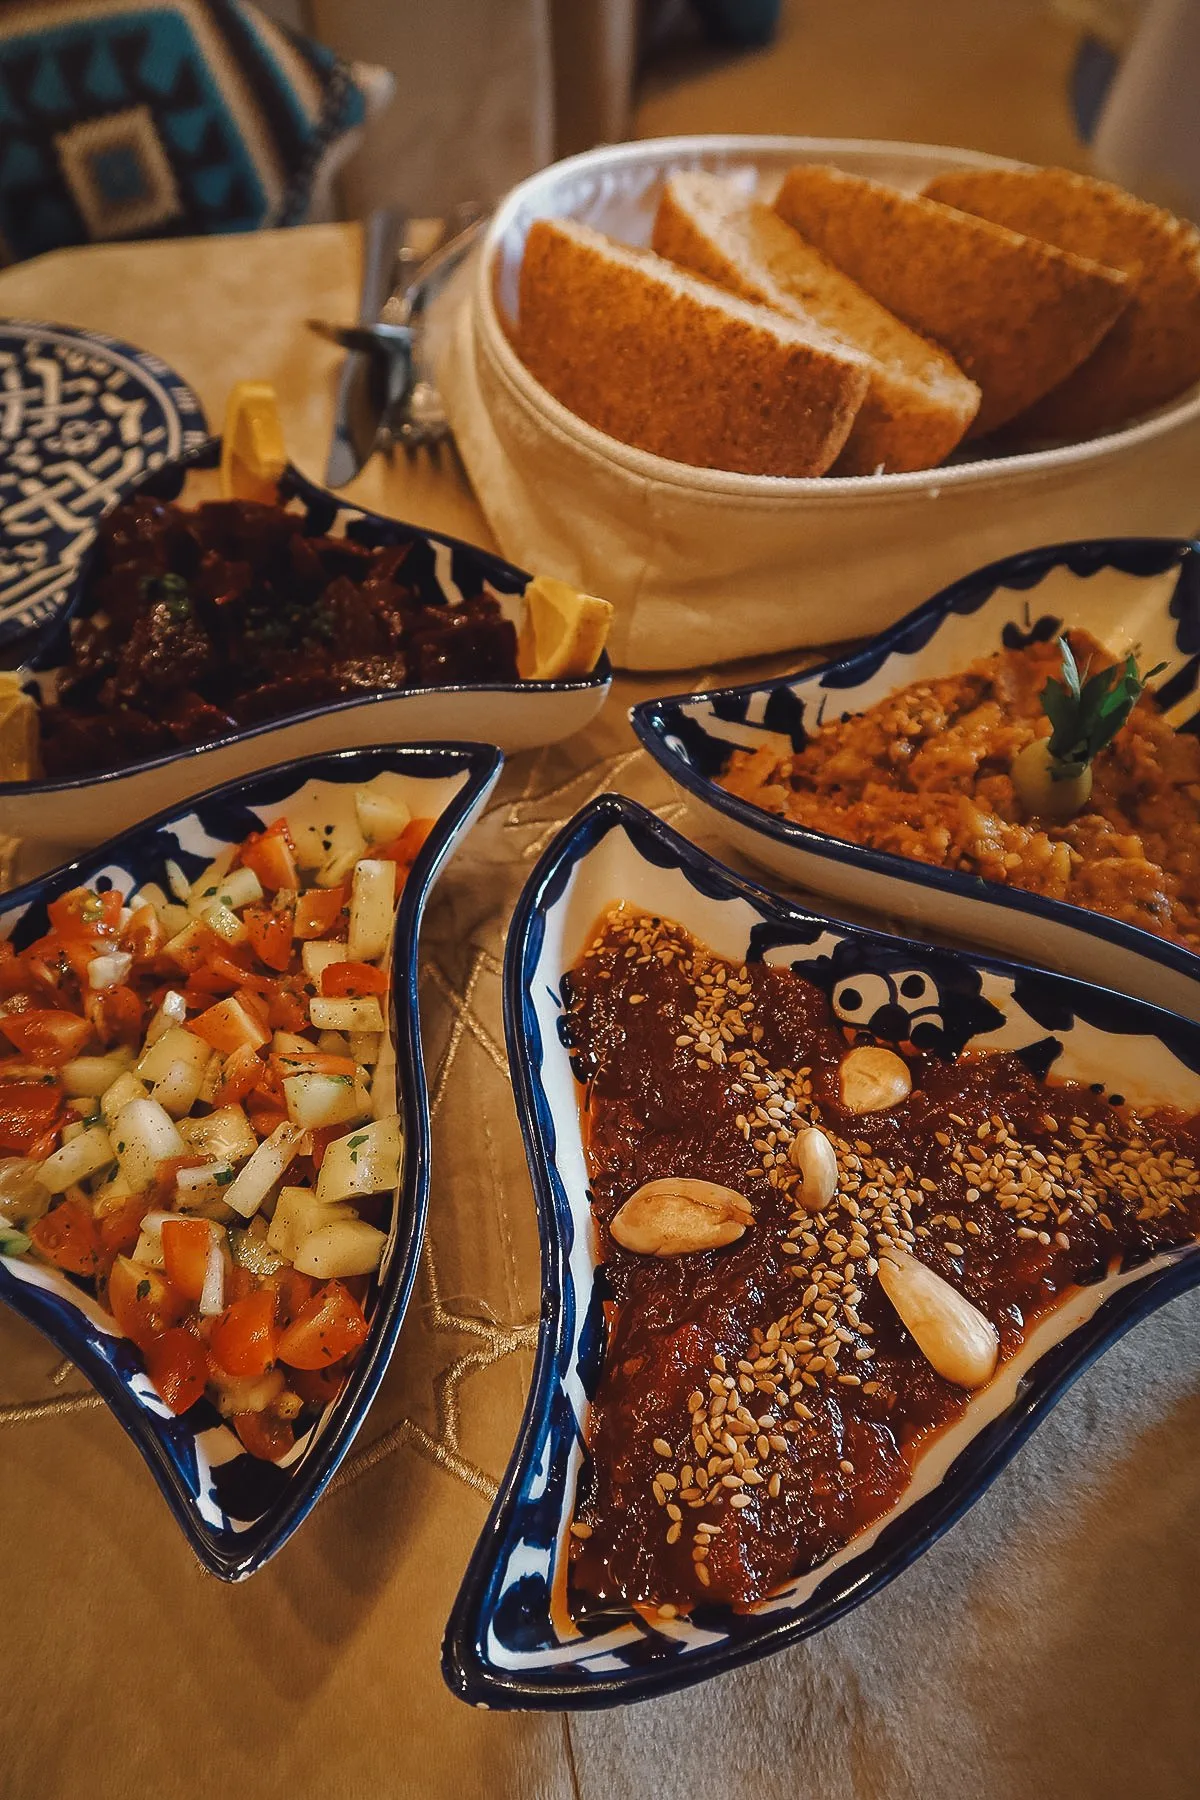 Moroccan appetizers at a restaurant in Fez